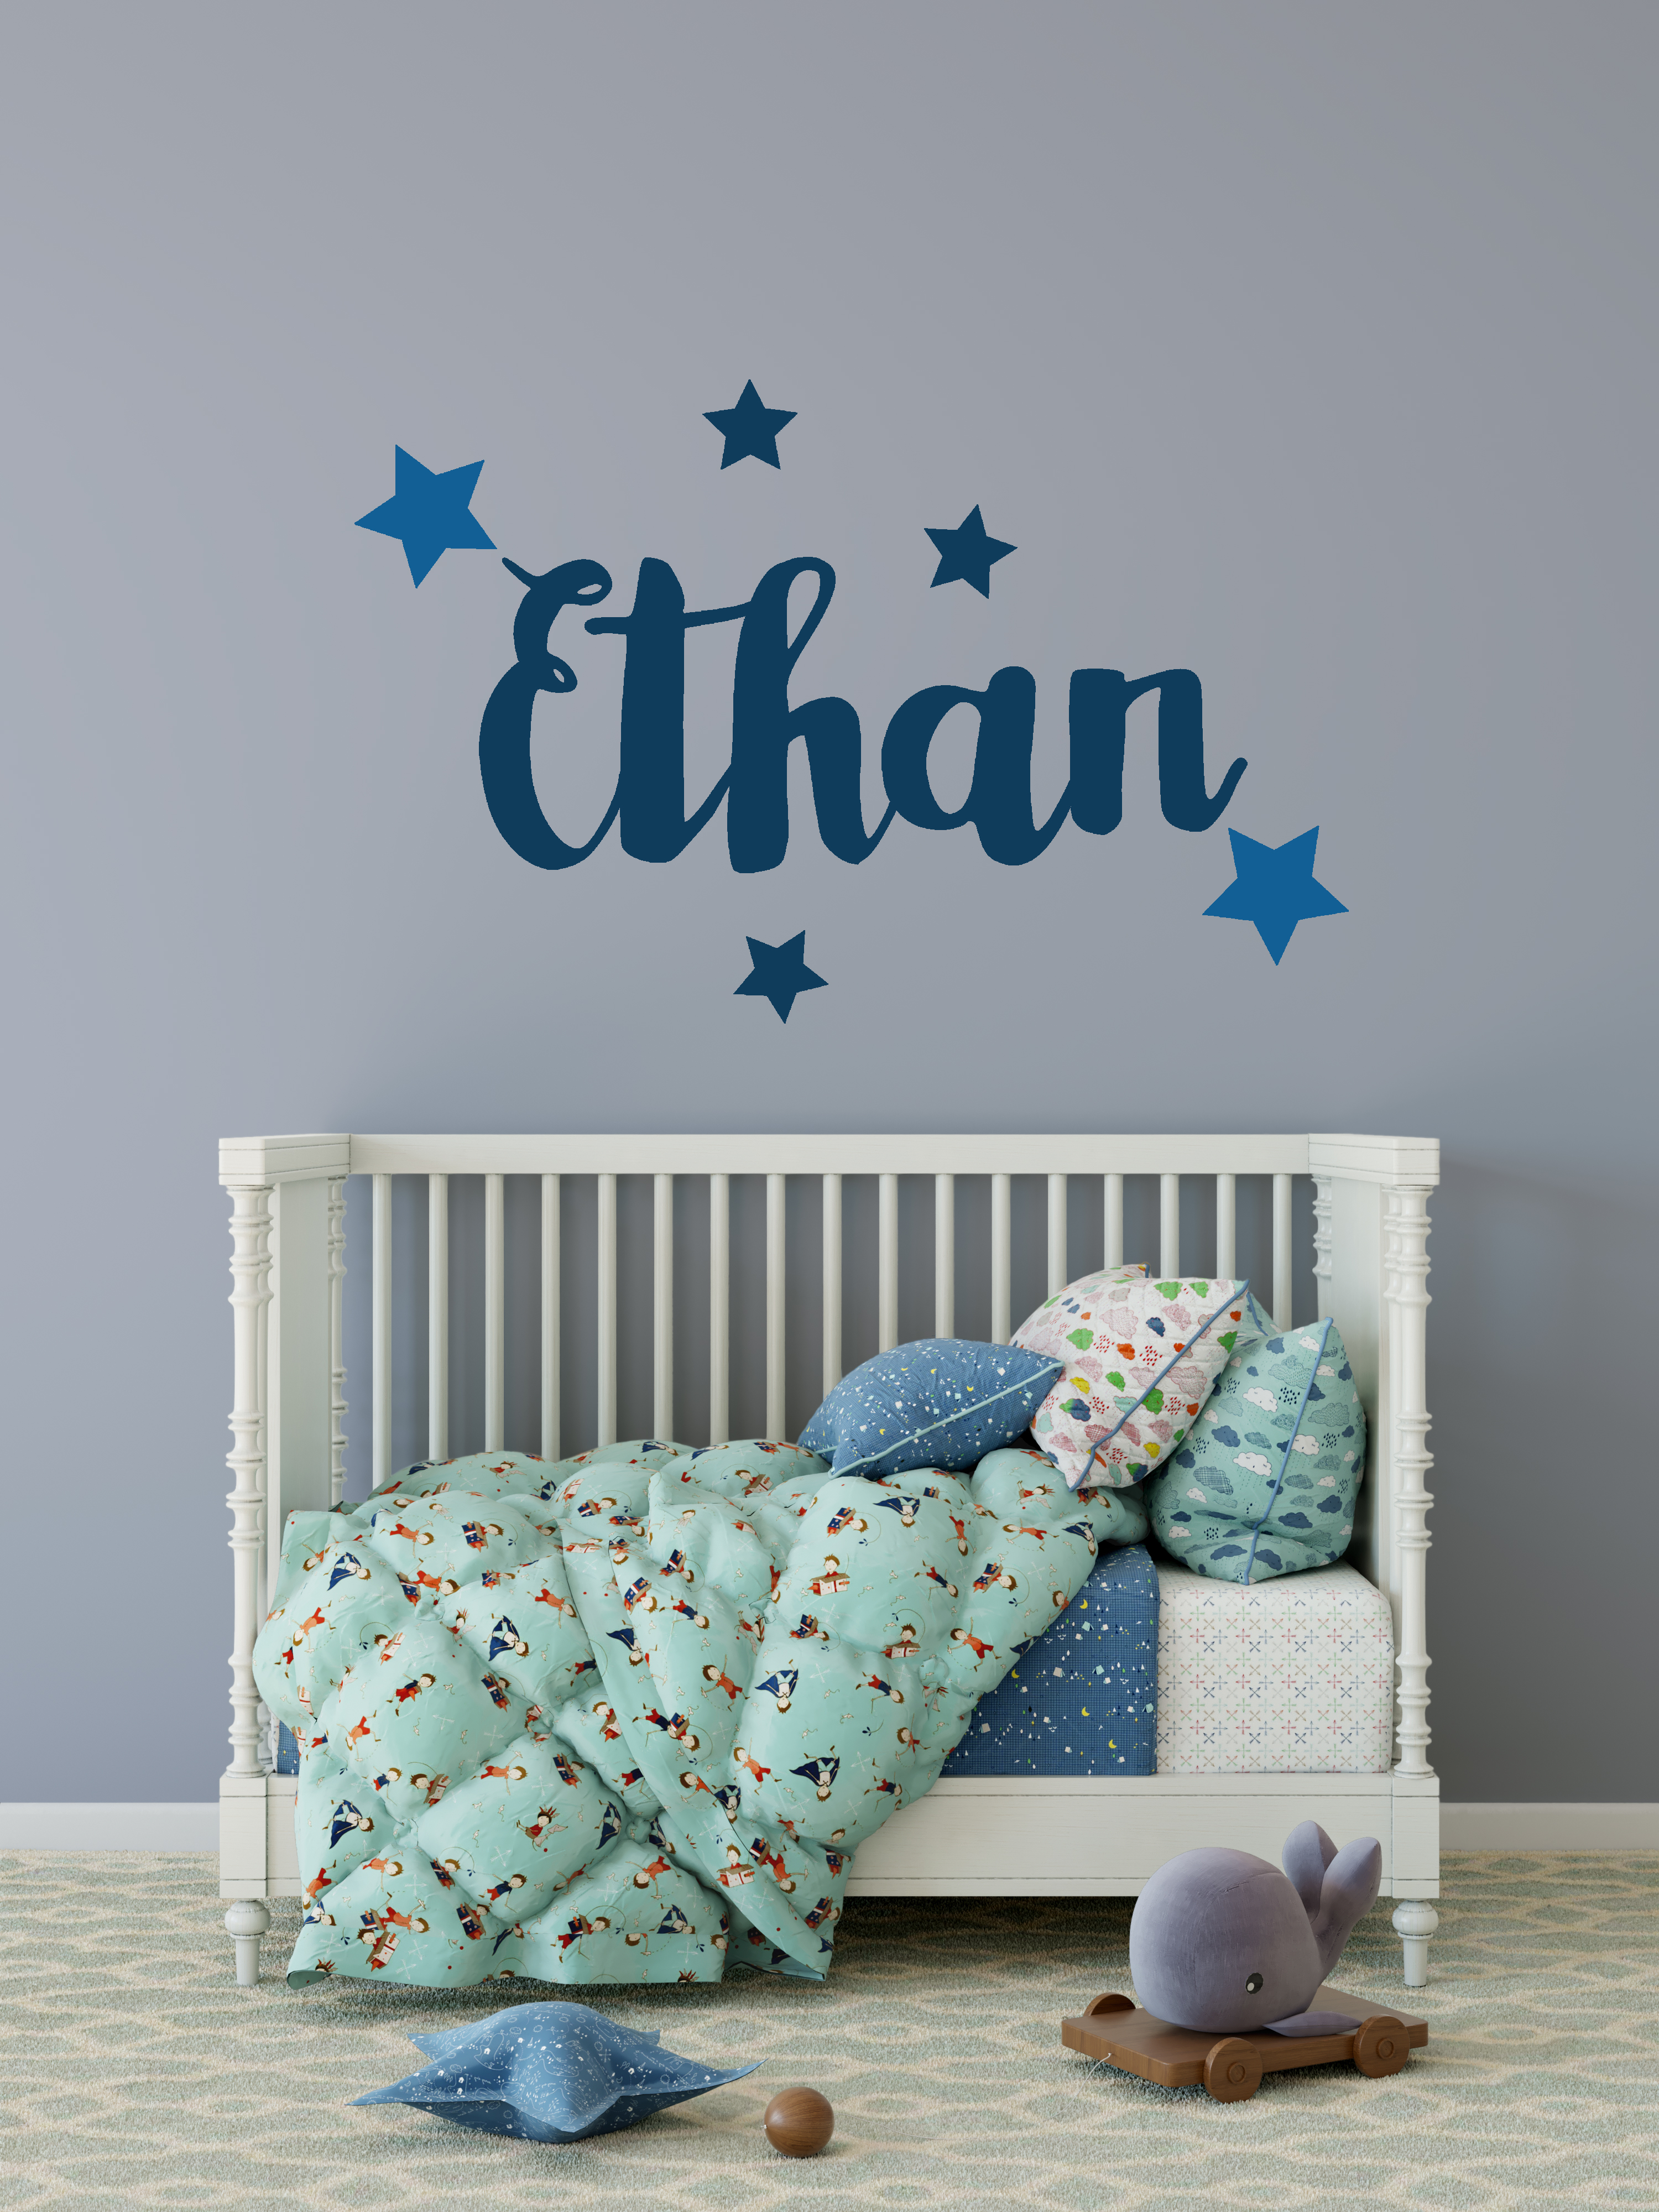 Personalised Name with 32 Stars to apply anywhere on your Wall Vinyl Stickers 